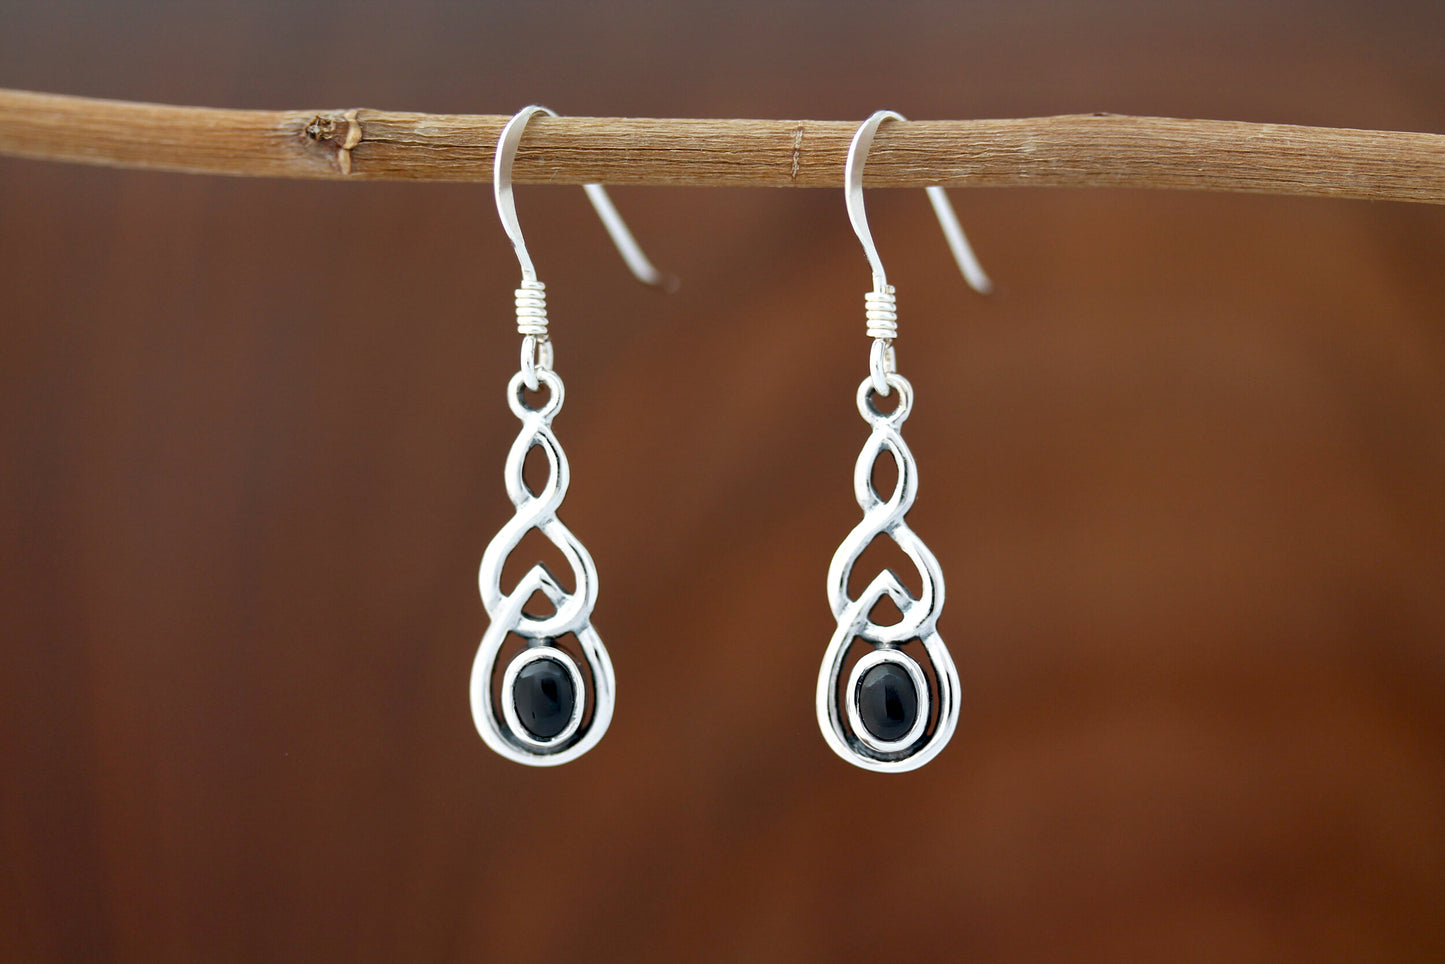 Celtic Knot Earrings - Interlocked Arms with Black Onyx